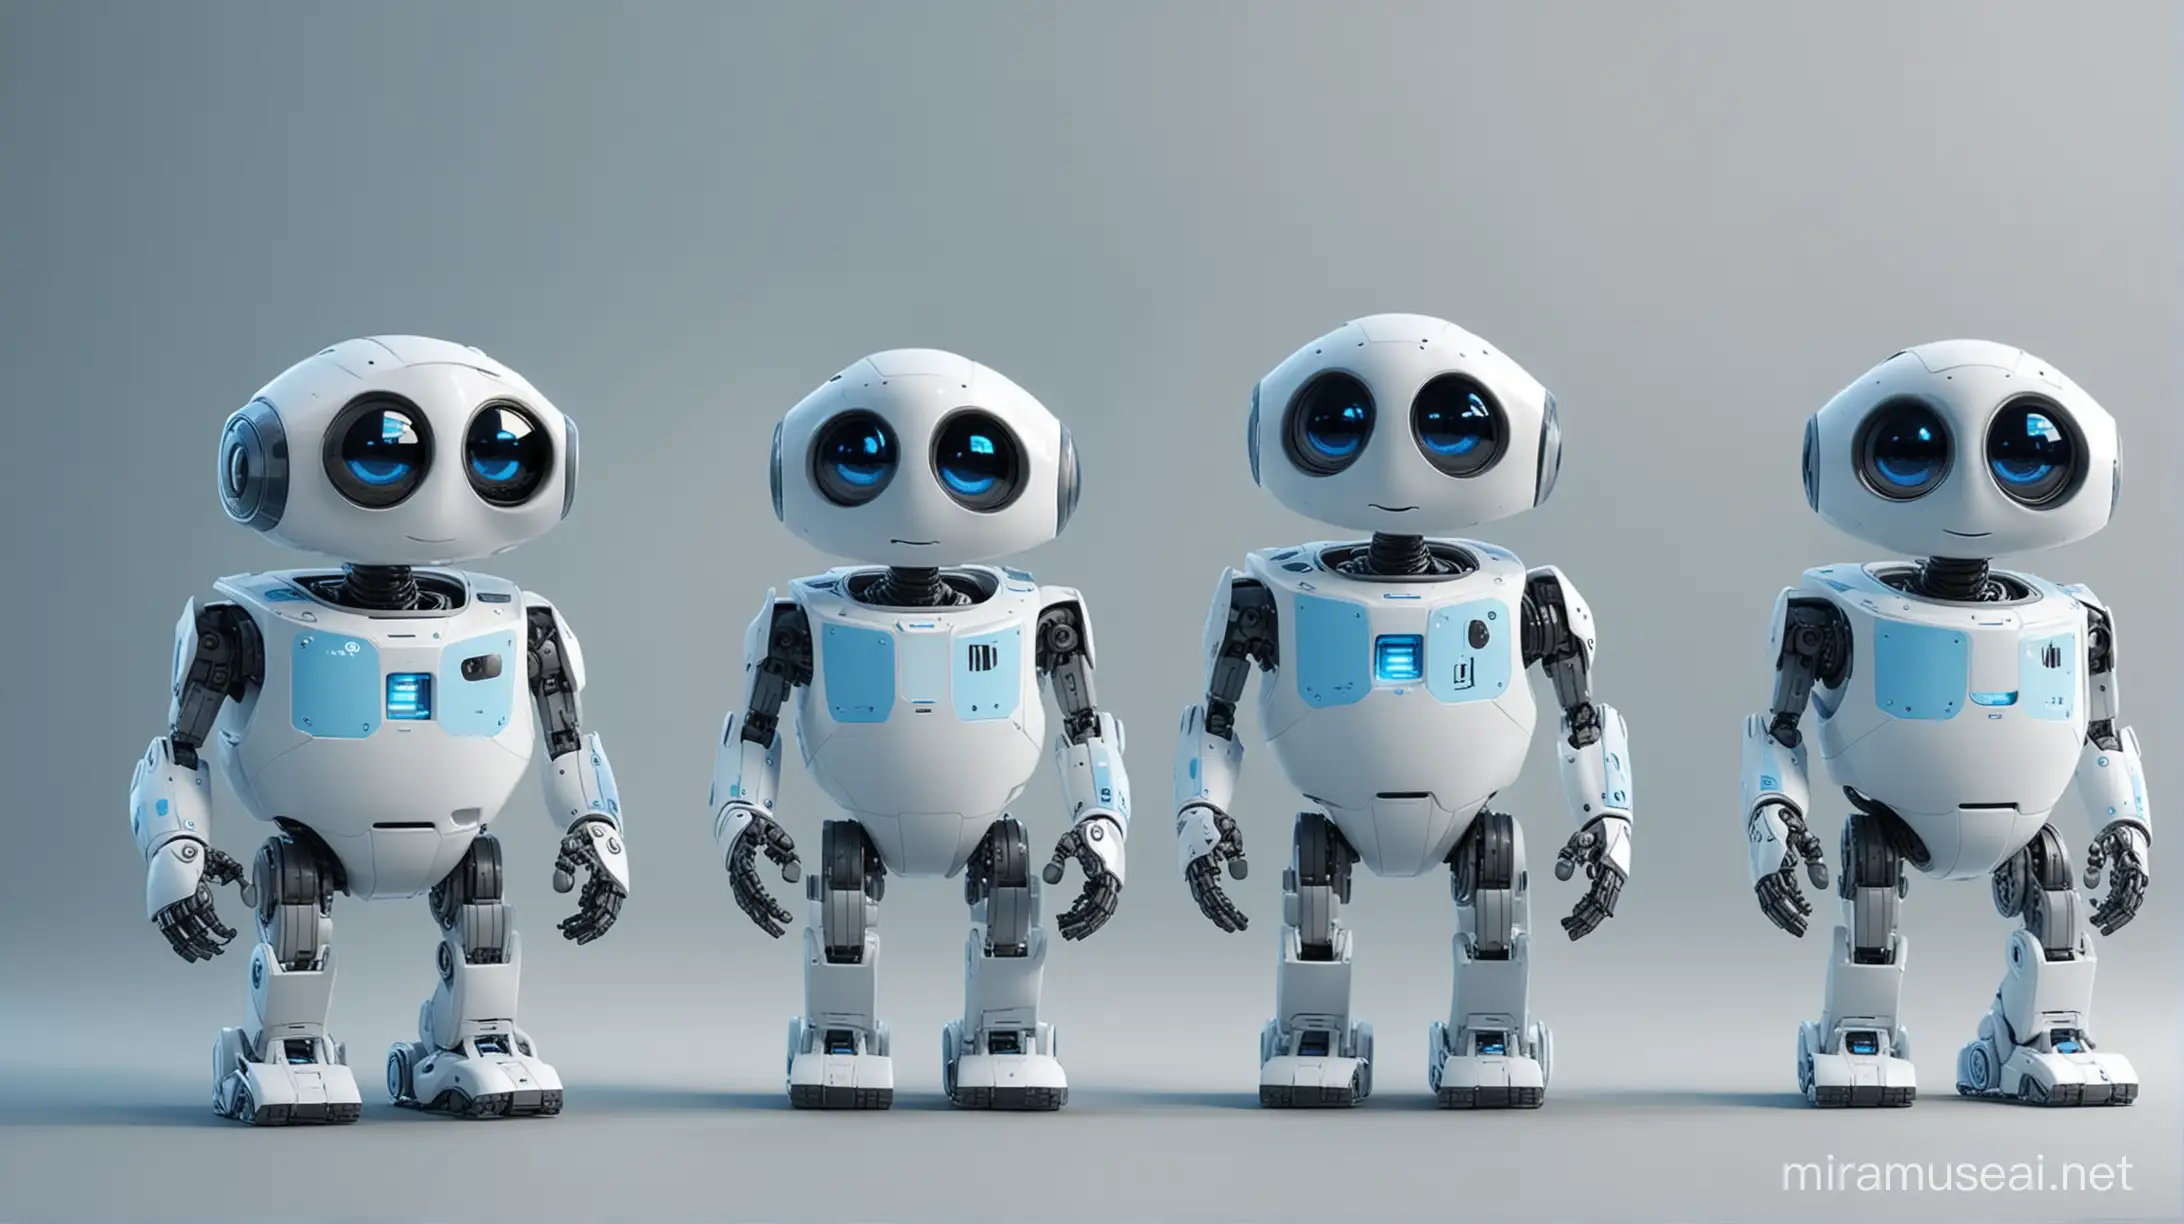 3d realistic group of Digital mascots similar like Eva robot in Wall-e movie. use accent sky blue tone for highlights. group of robots with different postures and emotions standing in a row